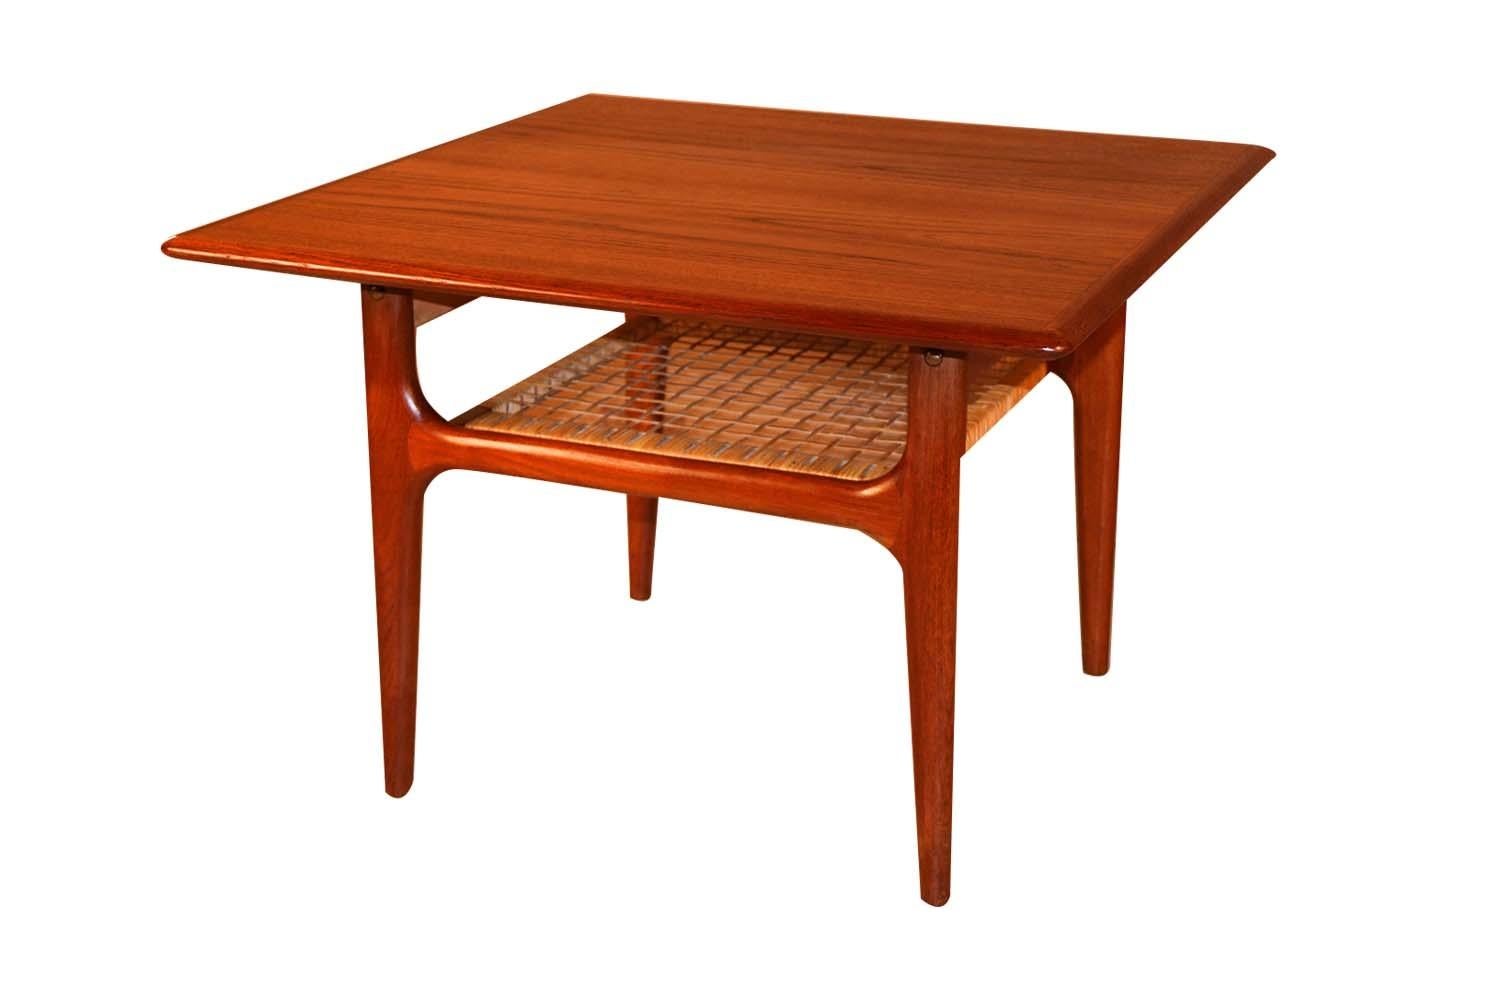 A beautifully crafted, Danish, two-tier, teak and cane table designed by Trioh Mobler, circa 1960s. This table features a sturdy two tier design with the bottom tier strongly supported by original woven cane. The second cane shelf adds additional